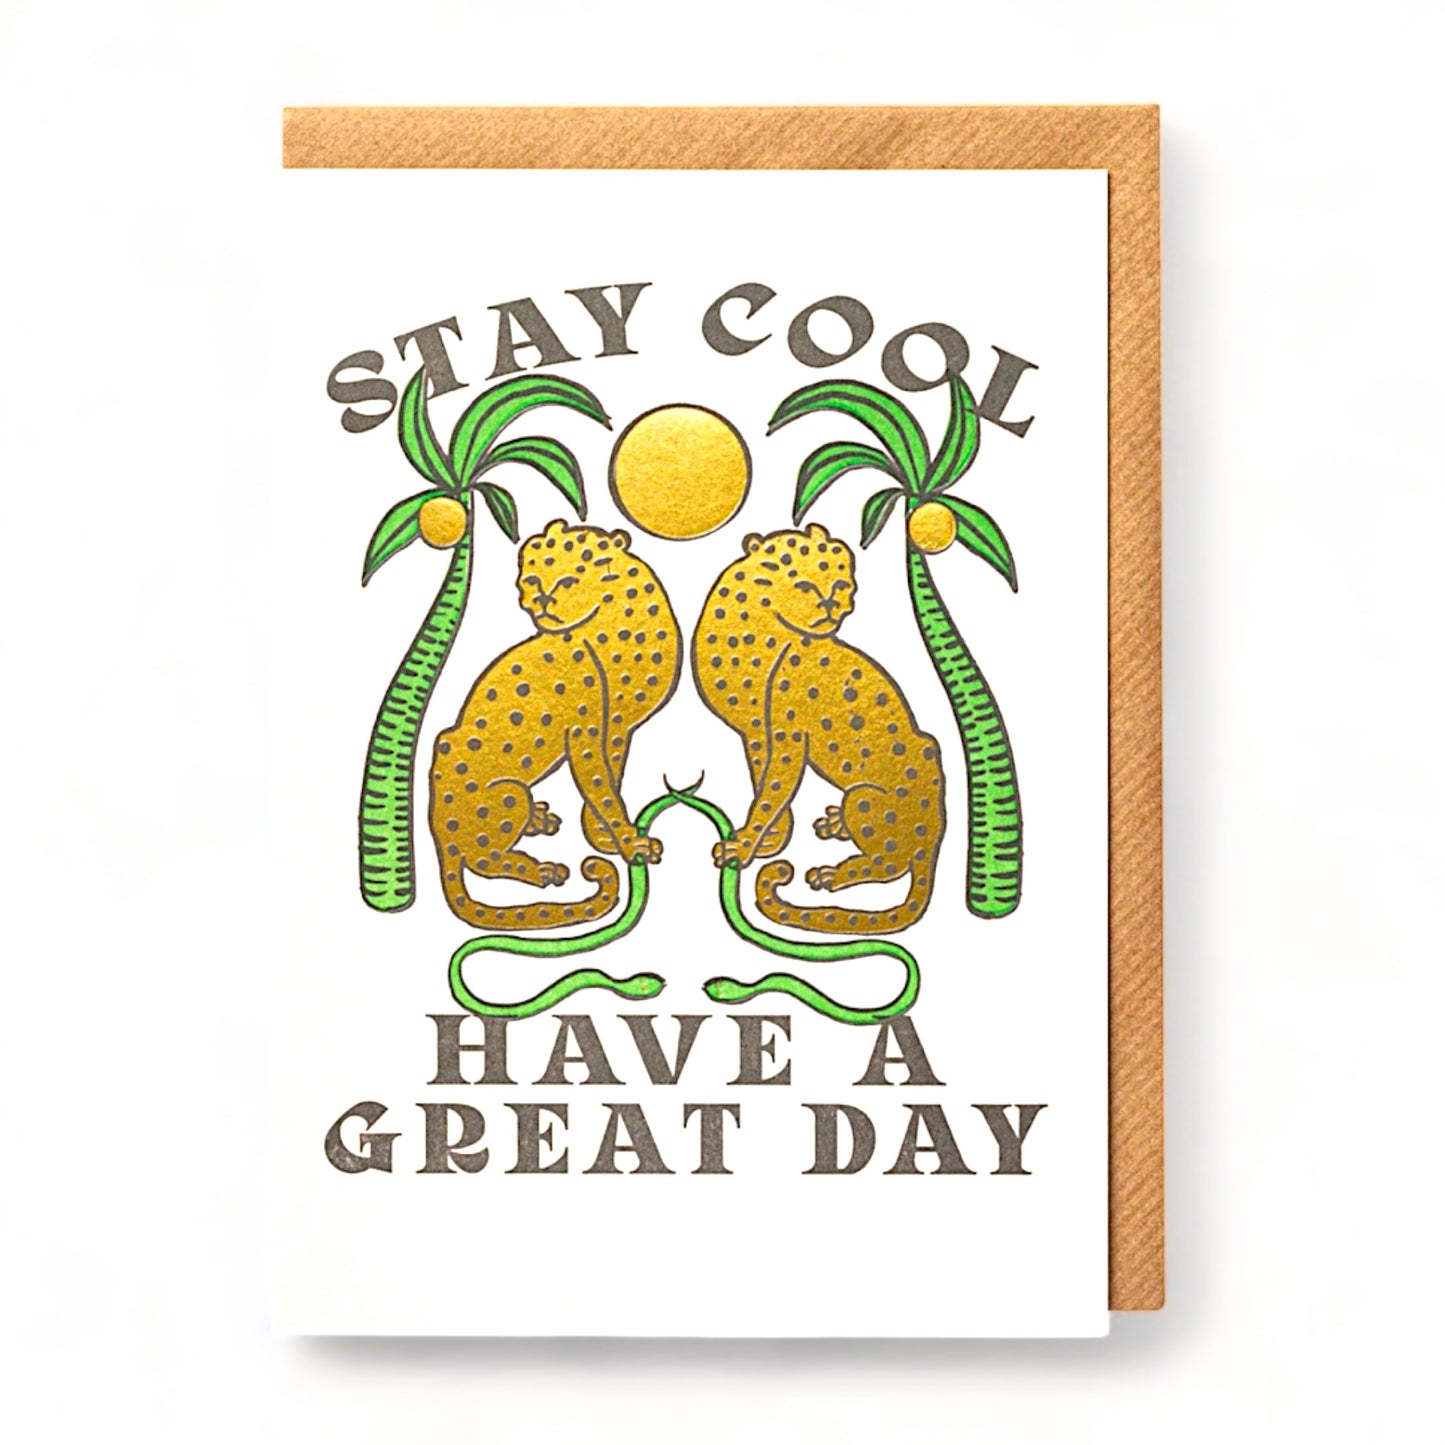 Stay Cool - Greeting Card